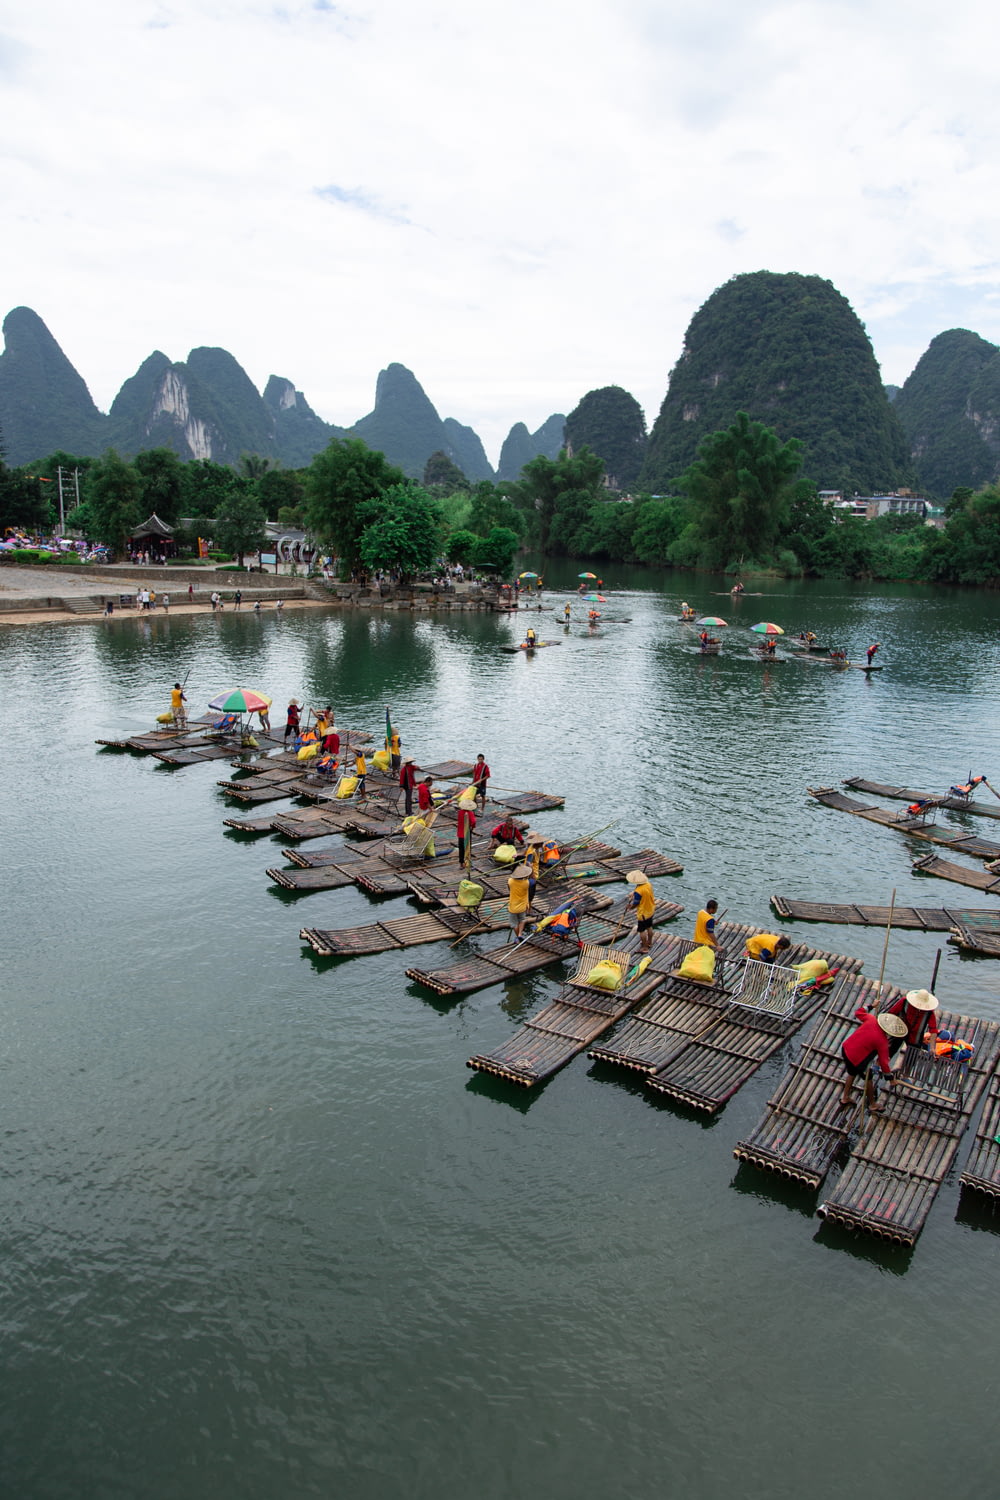 a group of people standing on wooden rafts in a body of water